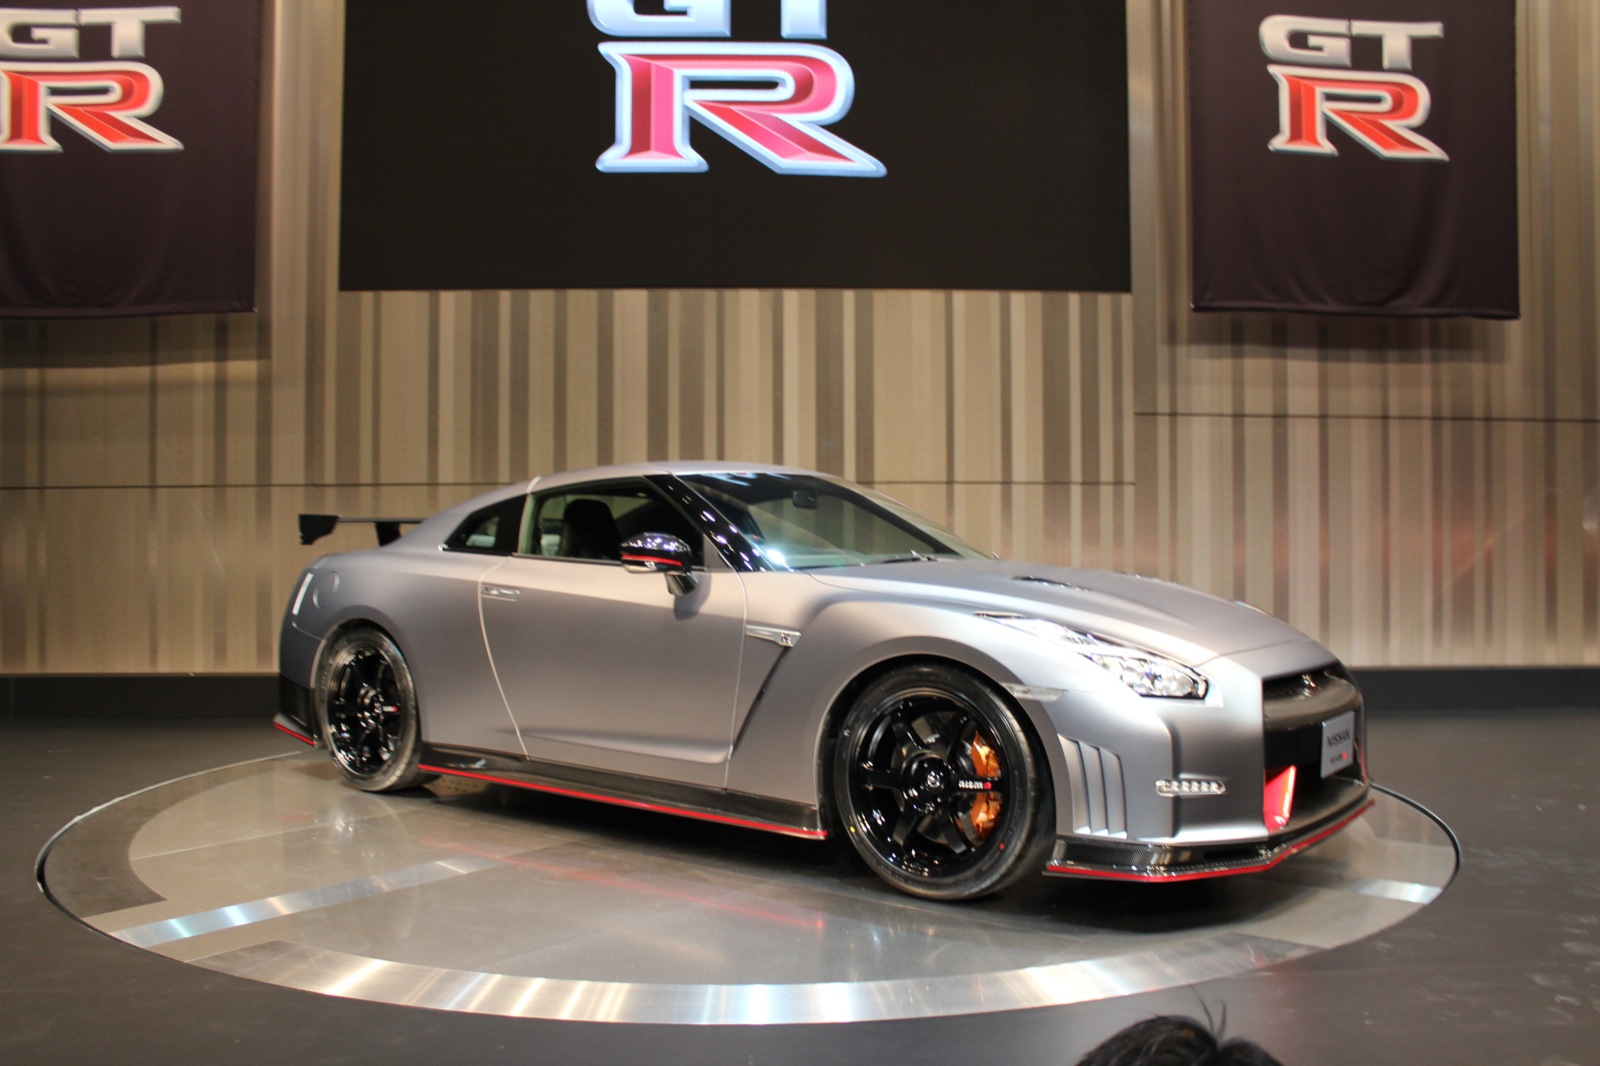 2015-nissan-gt-r-nismo--tokyo-motor-show-preview-event-nissan-global-headquarters_100446456_h